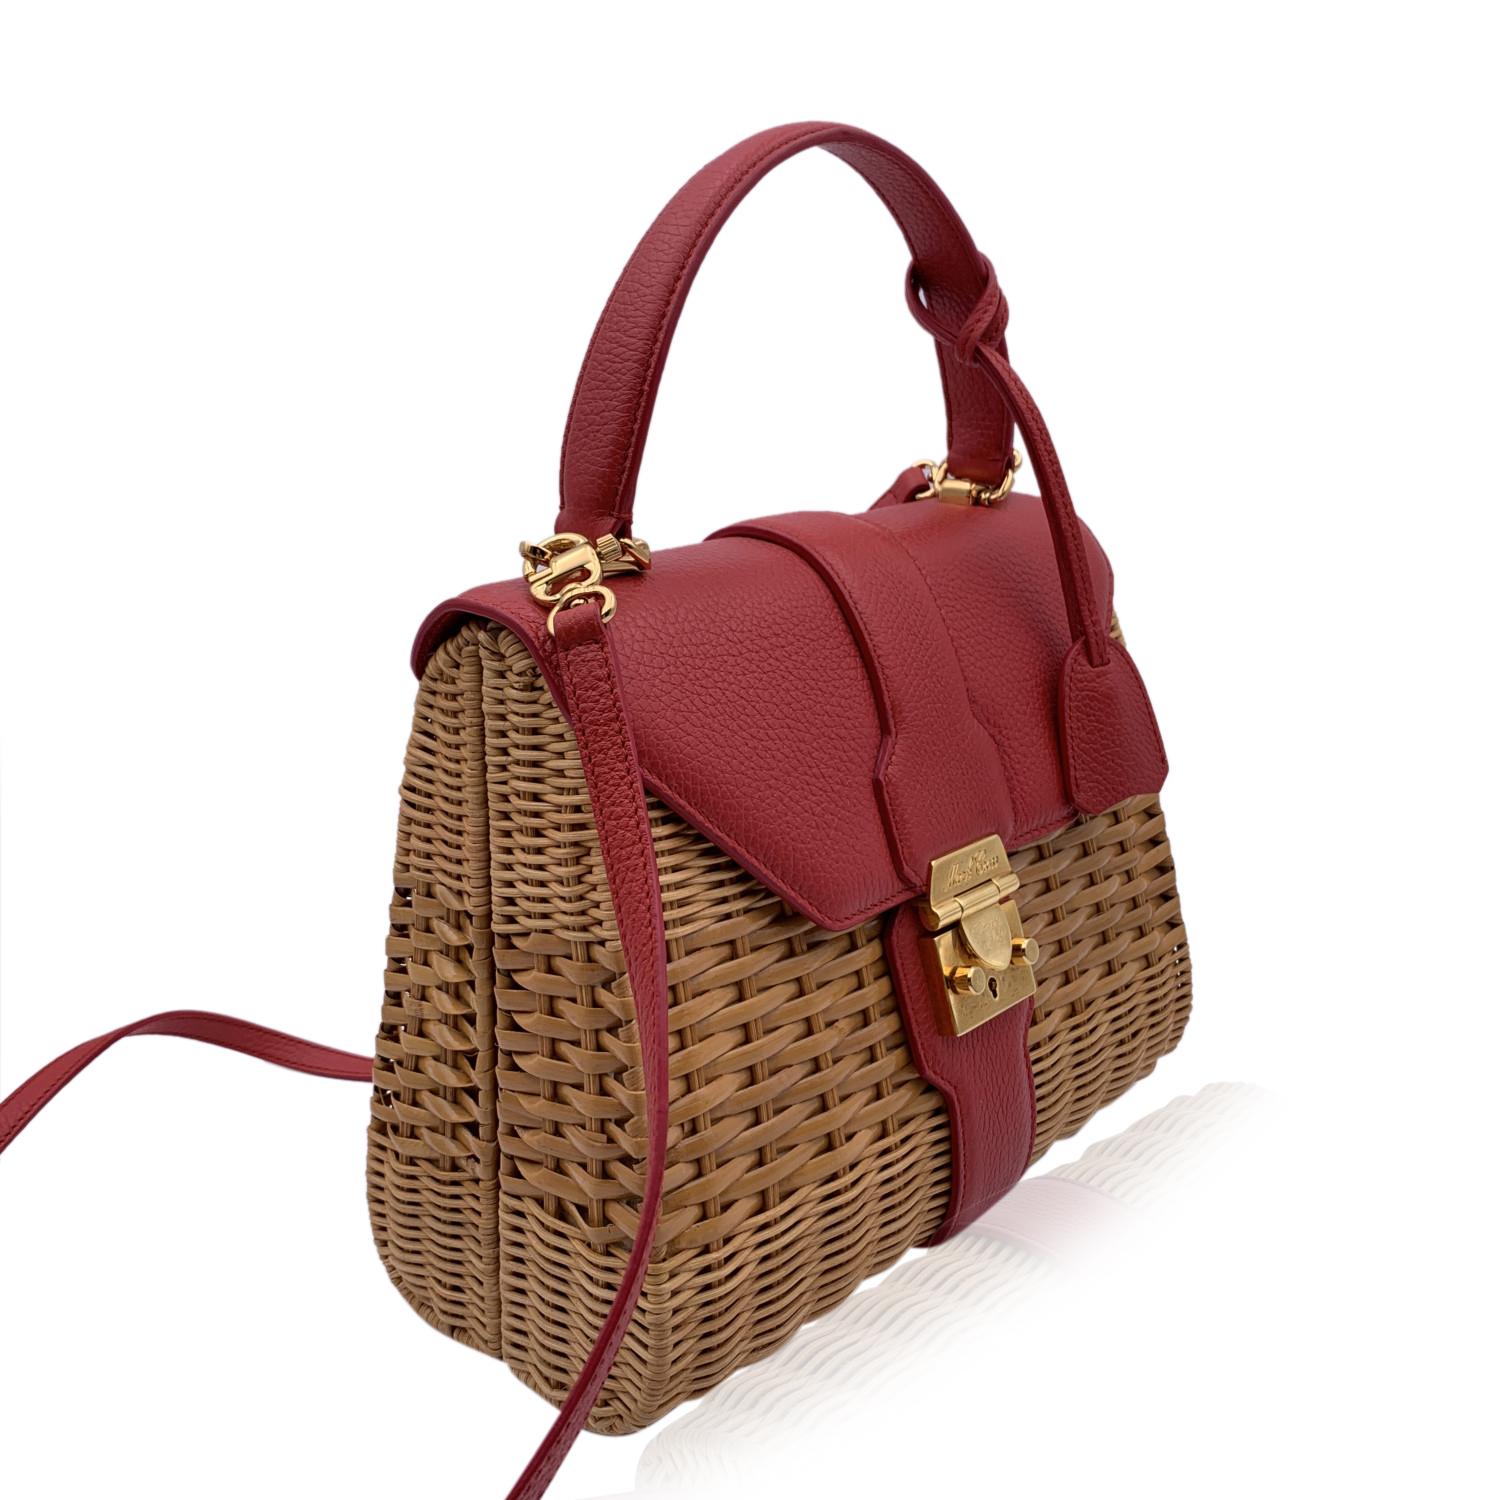 Women's Mark Cross Wicker and Red Leather Satchel Handbag with Strap